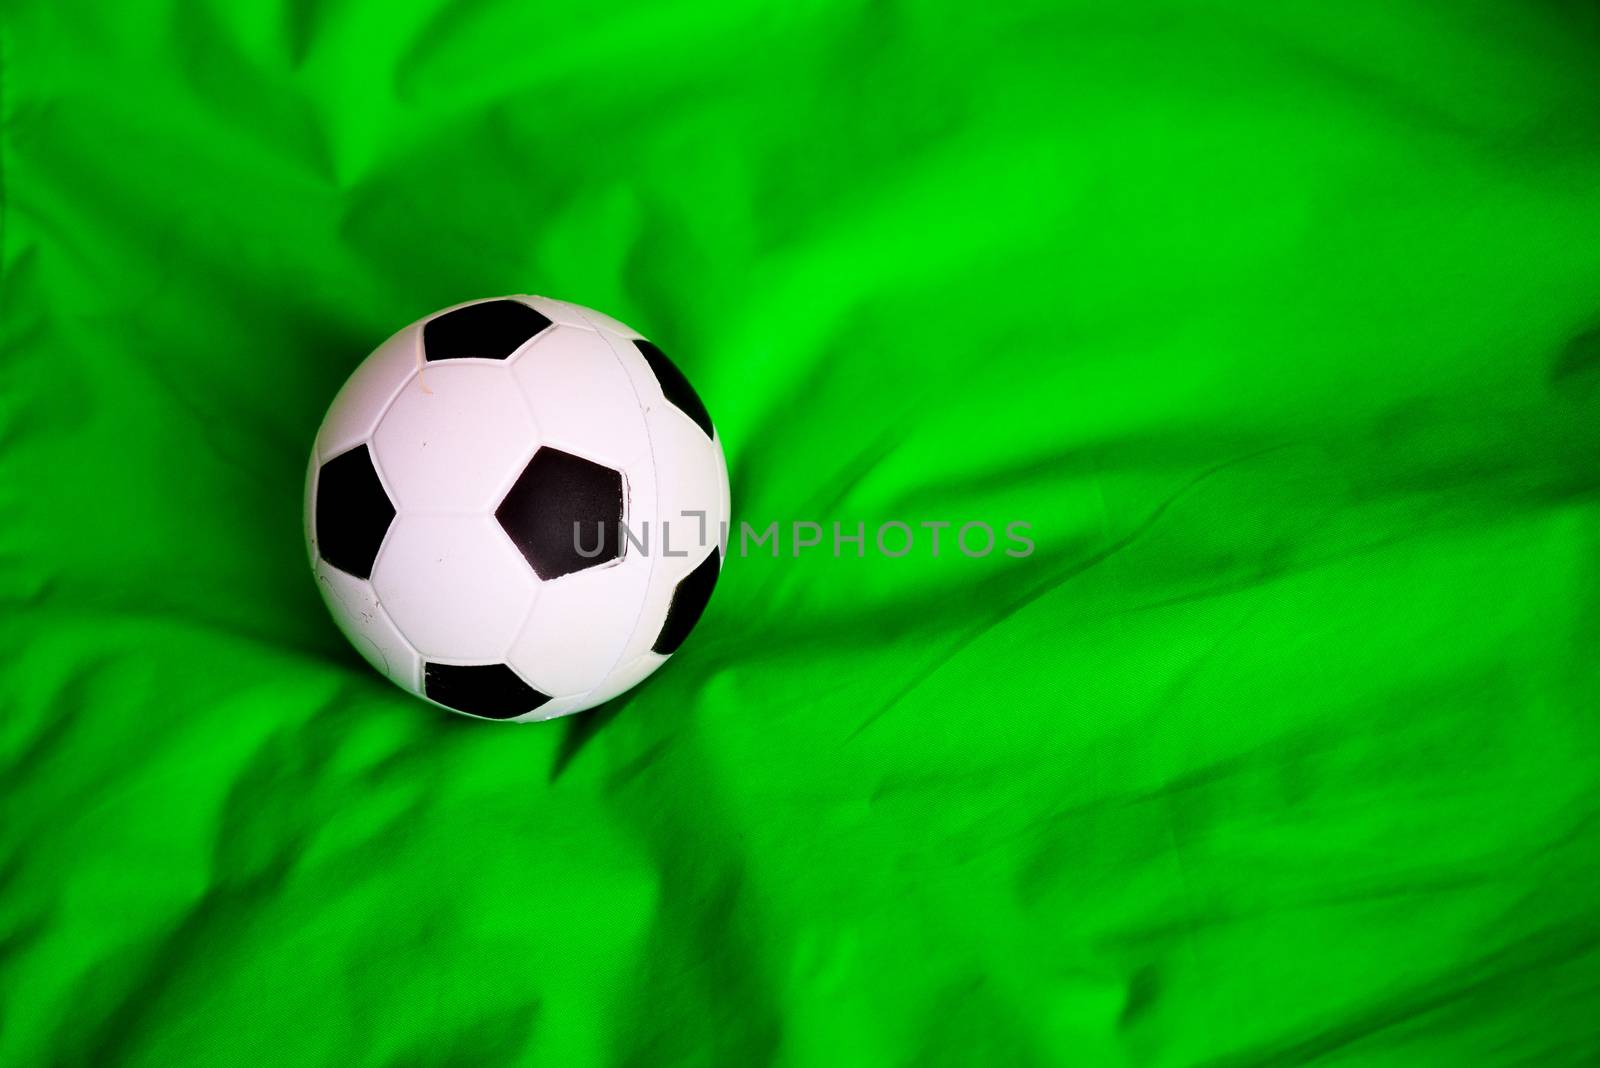 miniature soccer ball on fabric or carpet surface